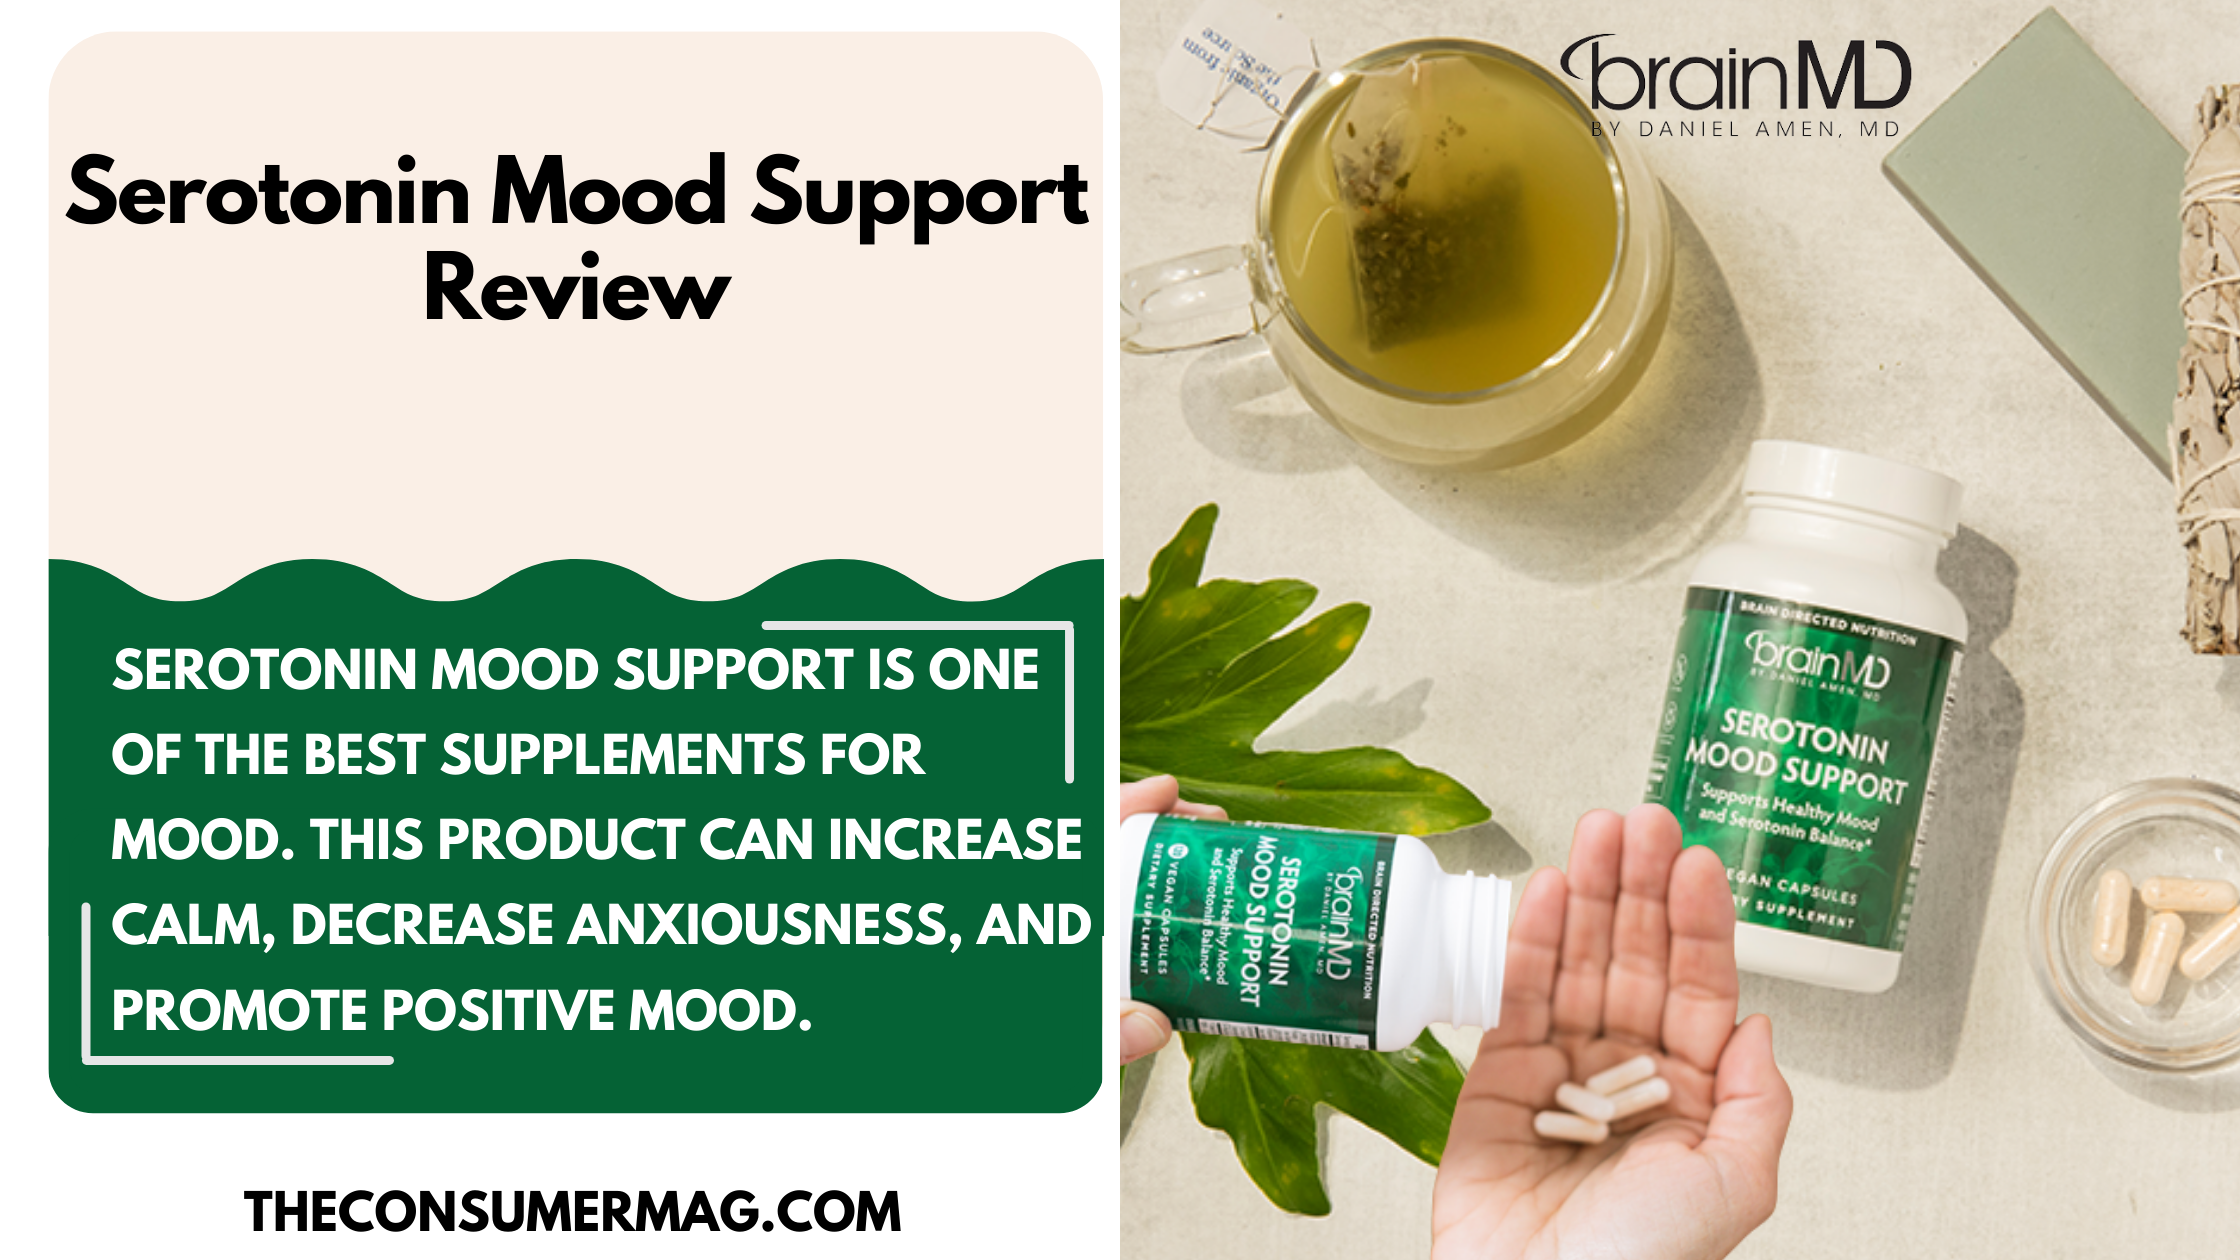 Brain MD Serotonin Mood Support Review |Read All Brain MD Reviews|